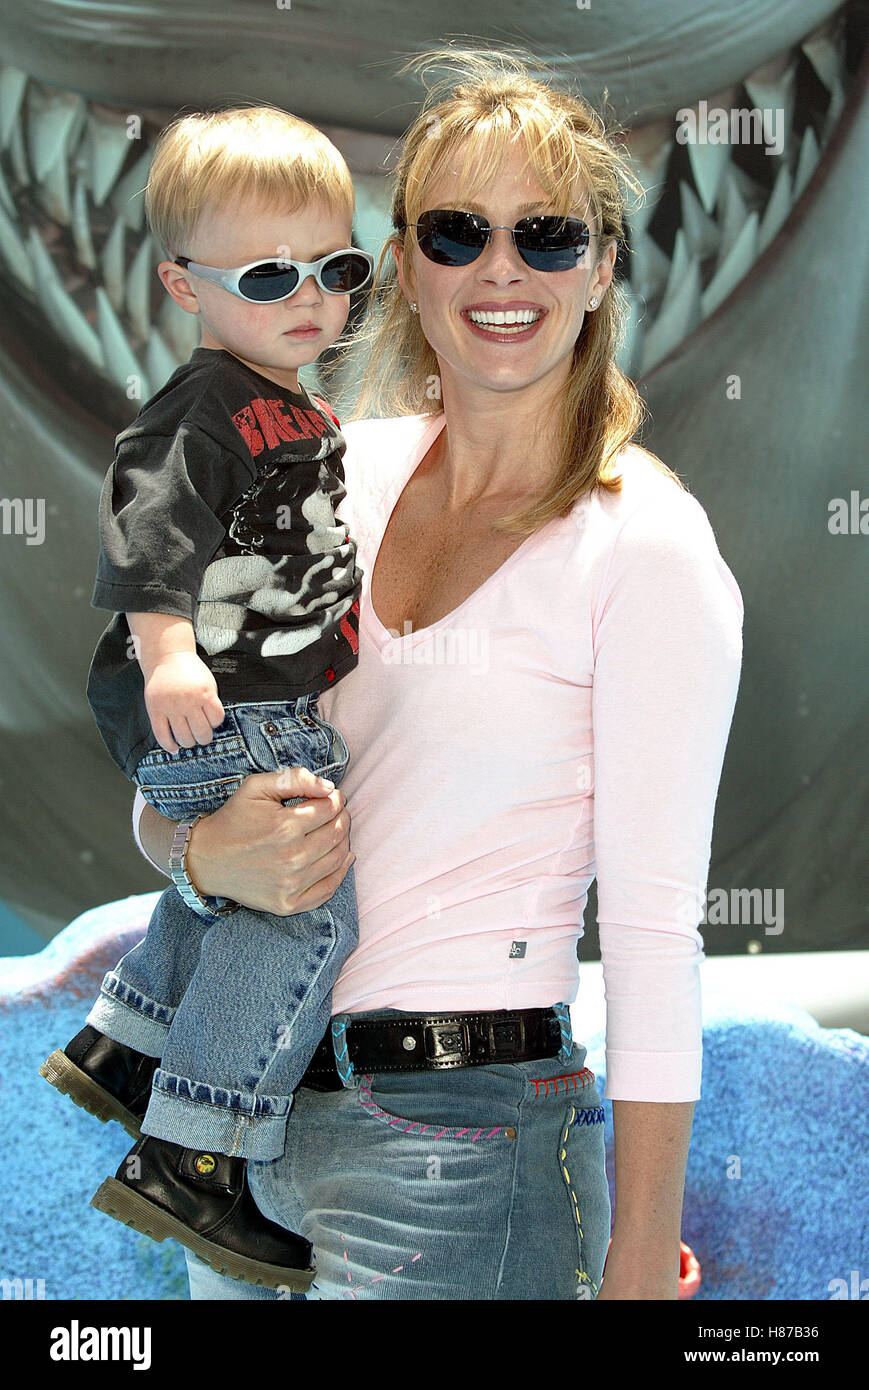 LAUREN HOLLY & ALEXANDER FINDING NEMO WORLD PREMIERE HOLLYWOOD LOS ANGELES USA 18 May 2003 Stock Photo